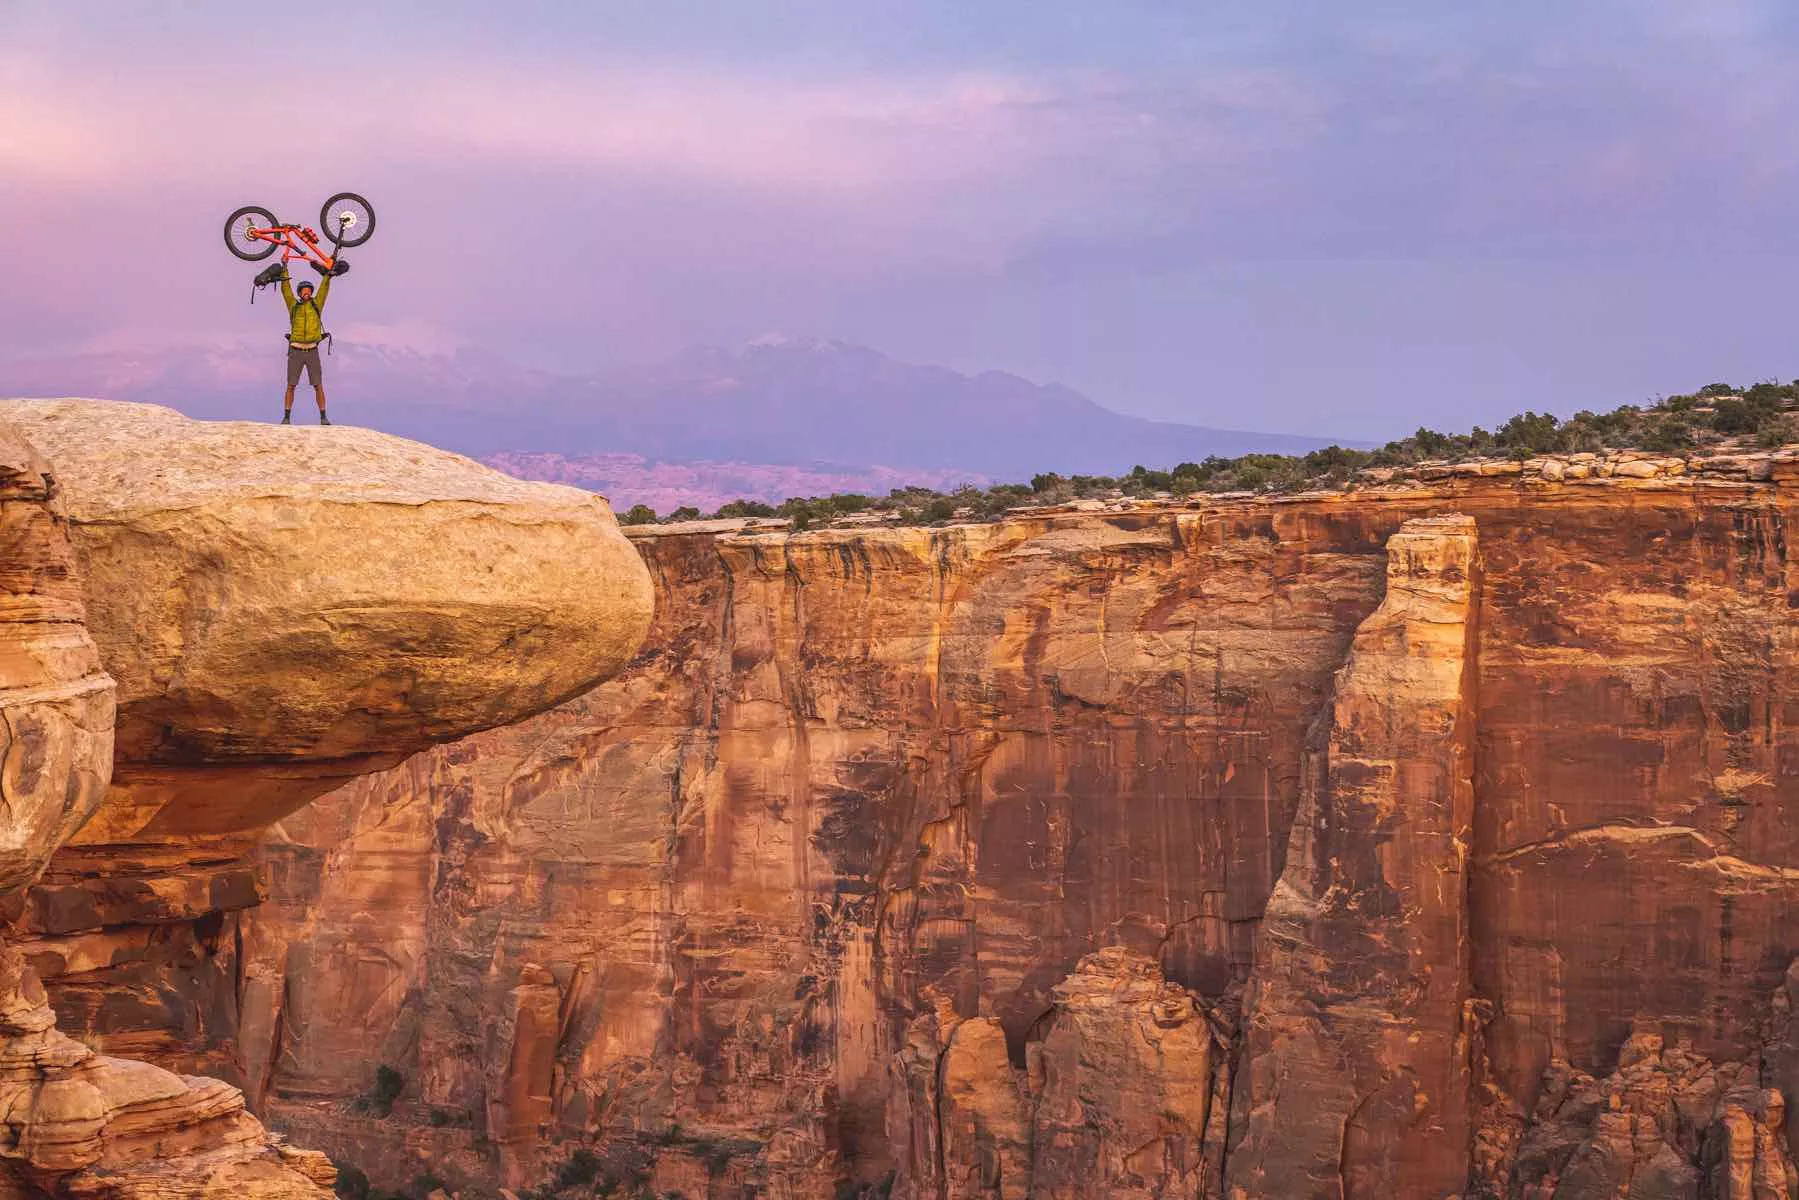 A mountain biker holds his bike over his head in the Colorado desert. Photo by Dan Holz.